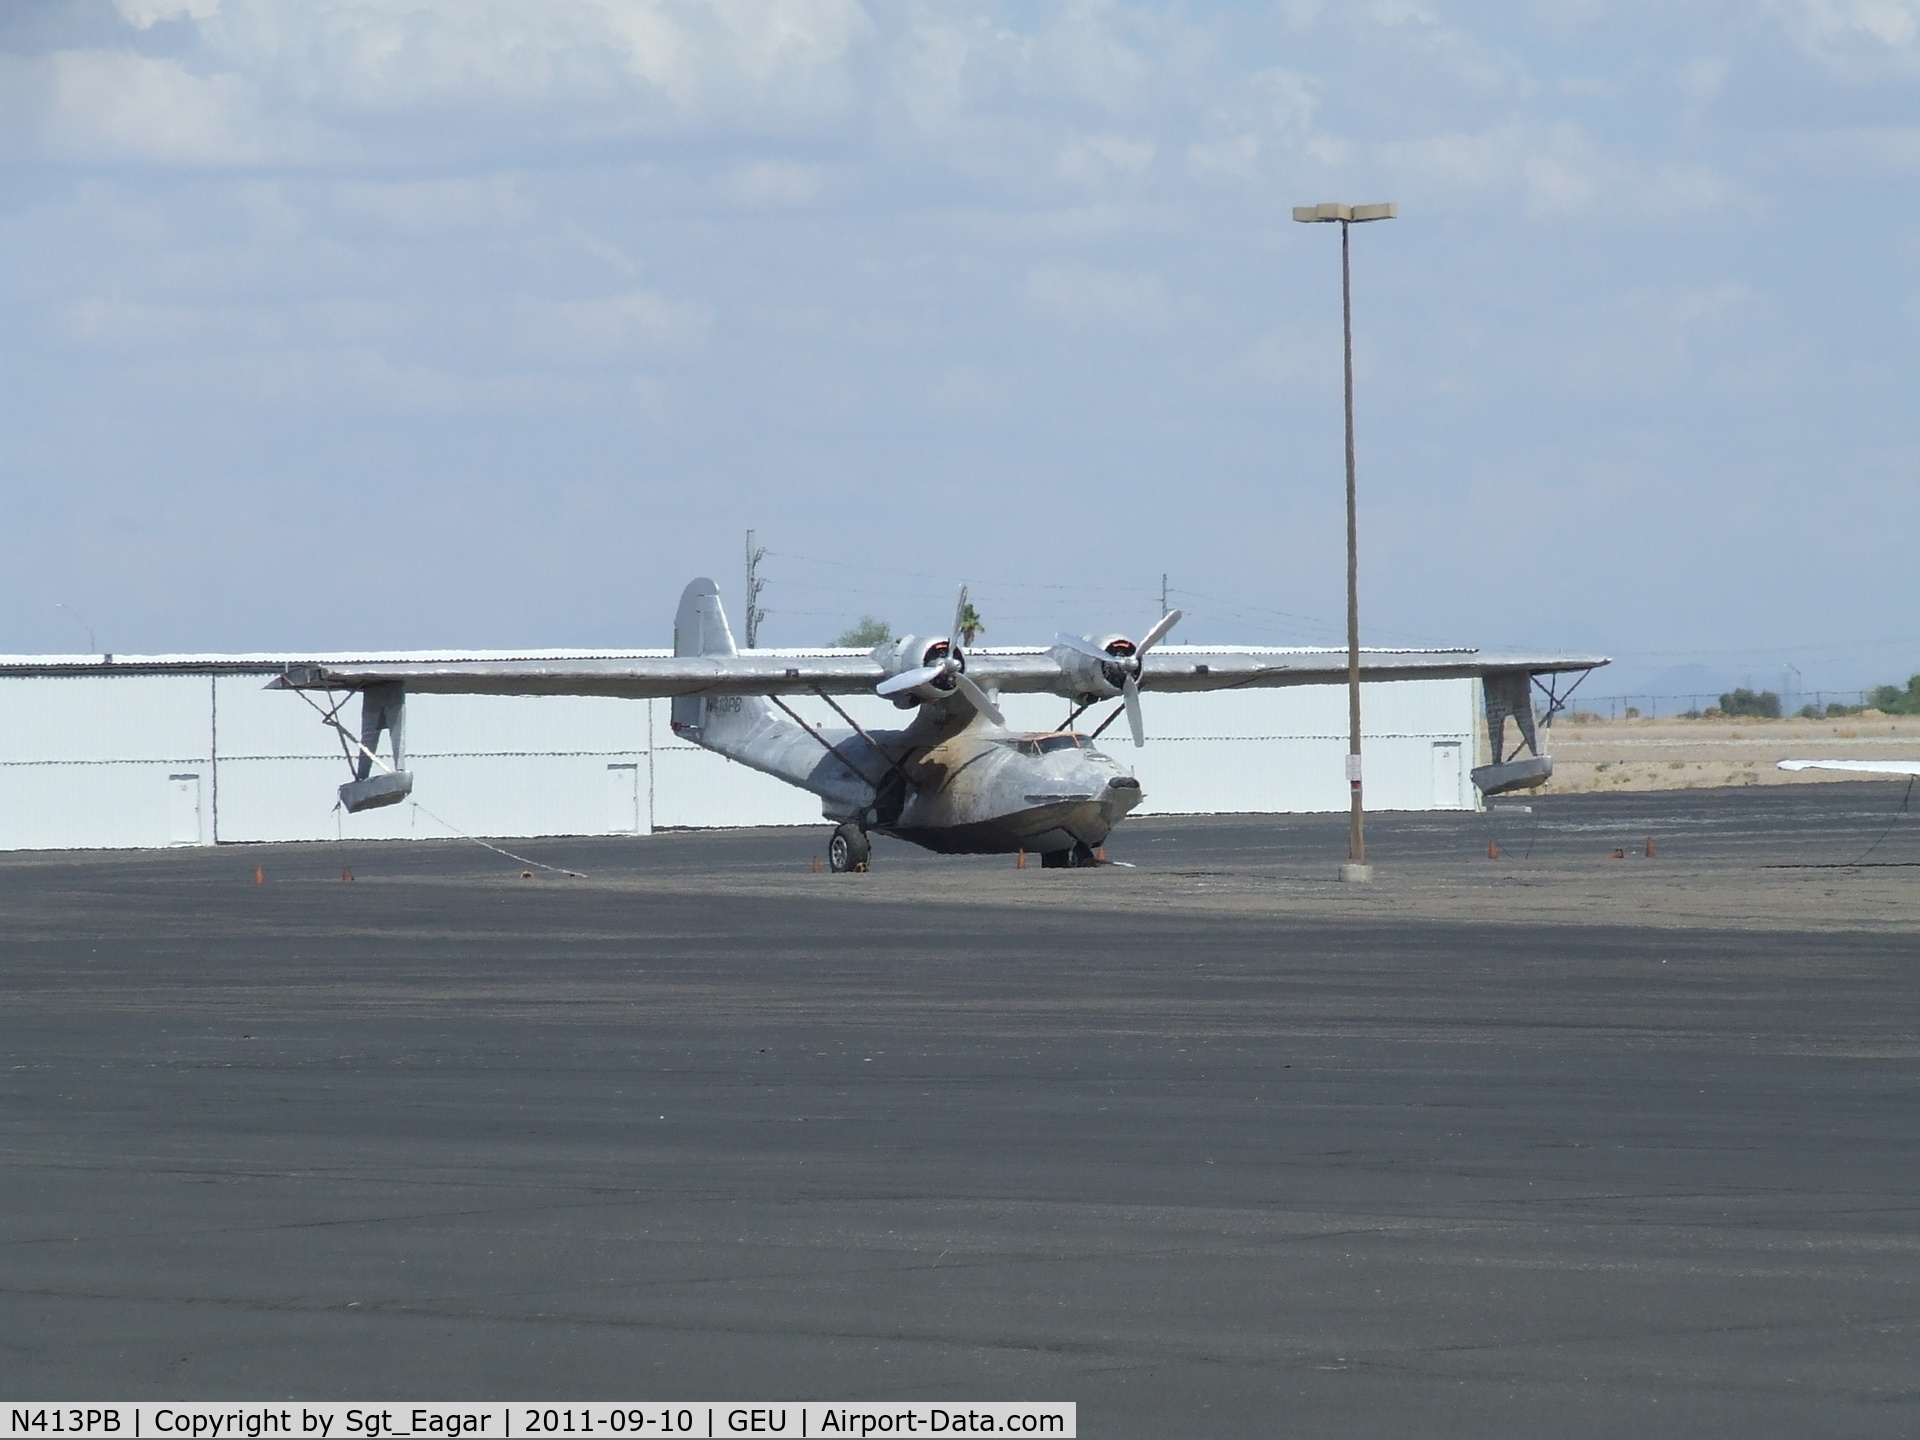 N413PB, Consolidated PBY-5A Catalina C/N CV343, You never know what you'll find when your out airplane spotting